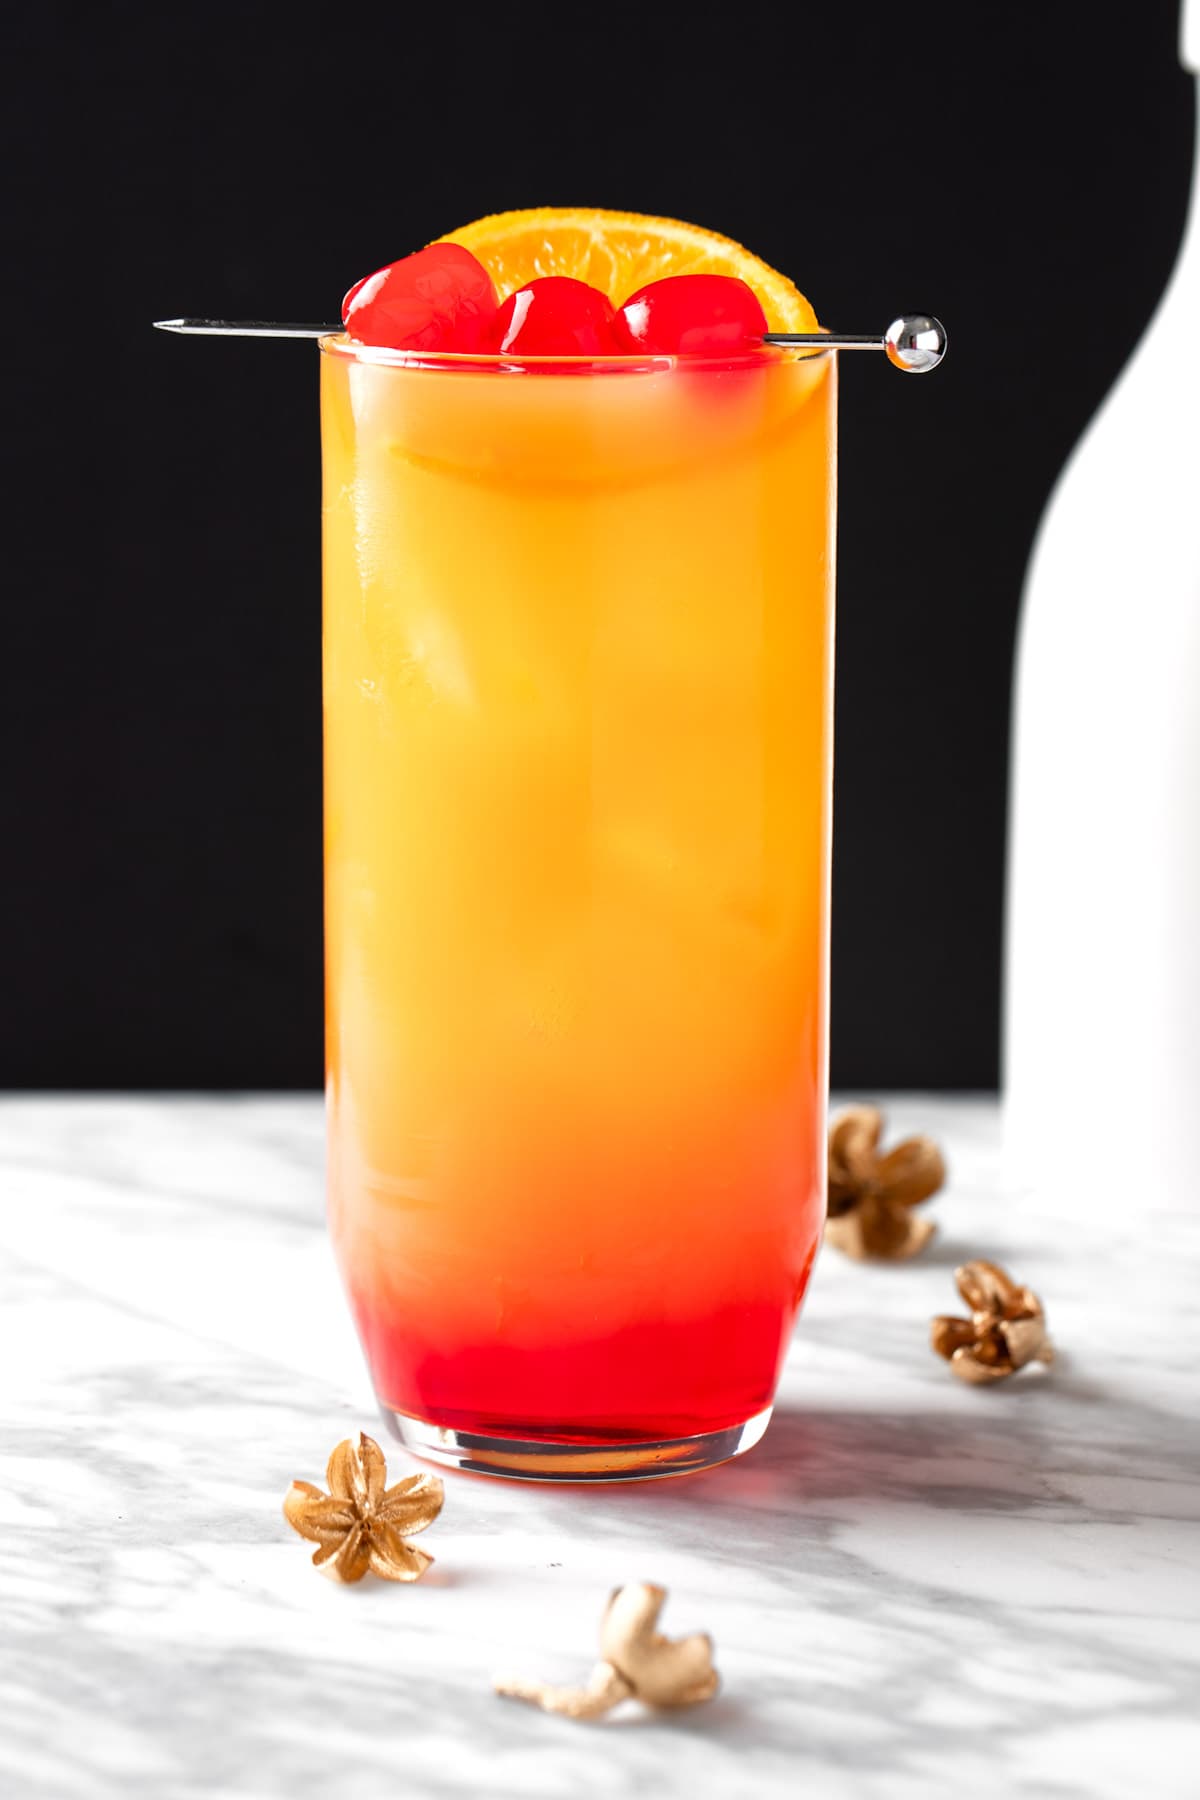 A tequila sunrise made with strawberry syrup on a white and black background.